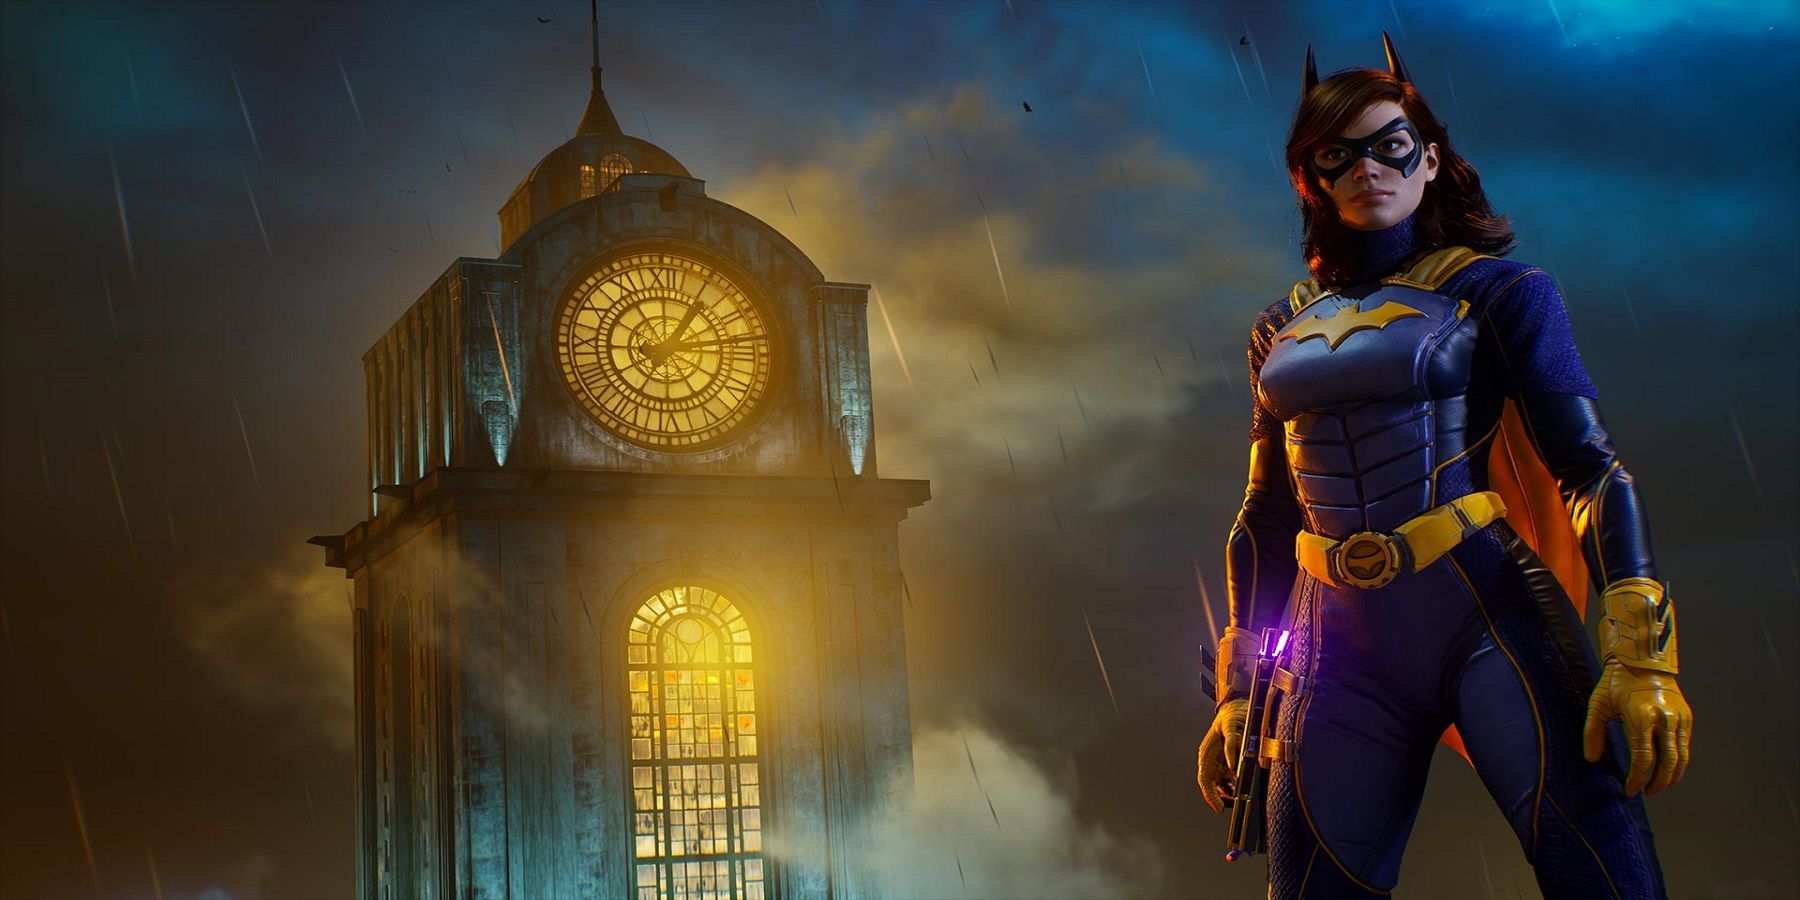 The next gameplay trailer for Gotham Knights will drop at San Diego Comic-Con, this time spotlighting Batgirl herself - Barbara Gordon.